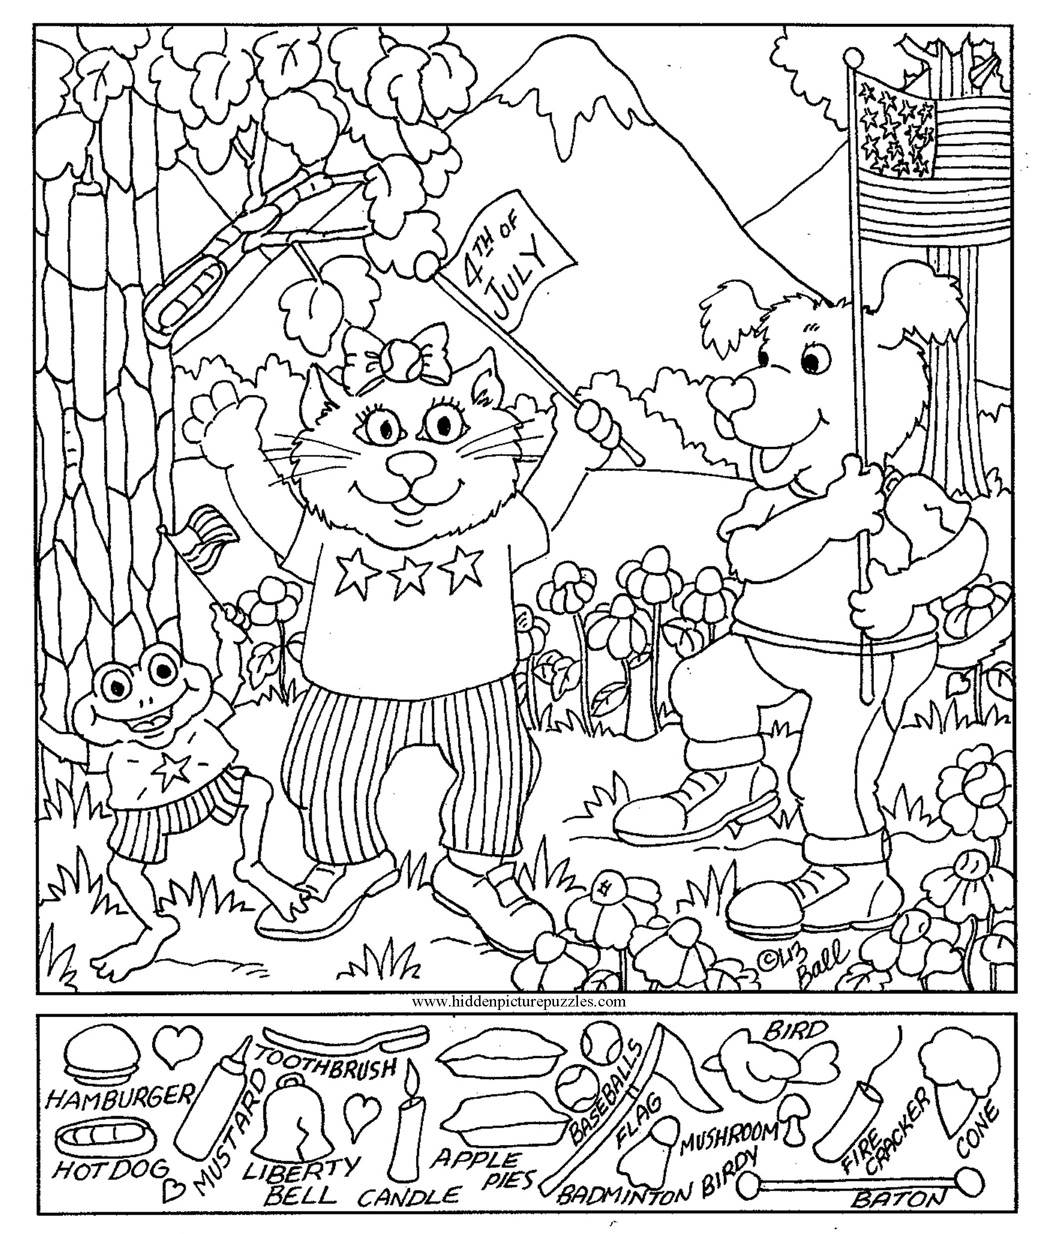 object search coloring pages and find objects - photo #23